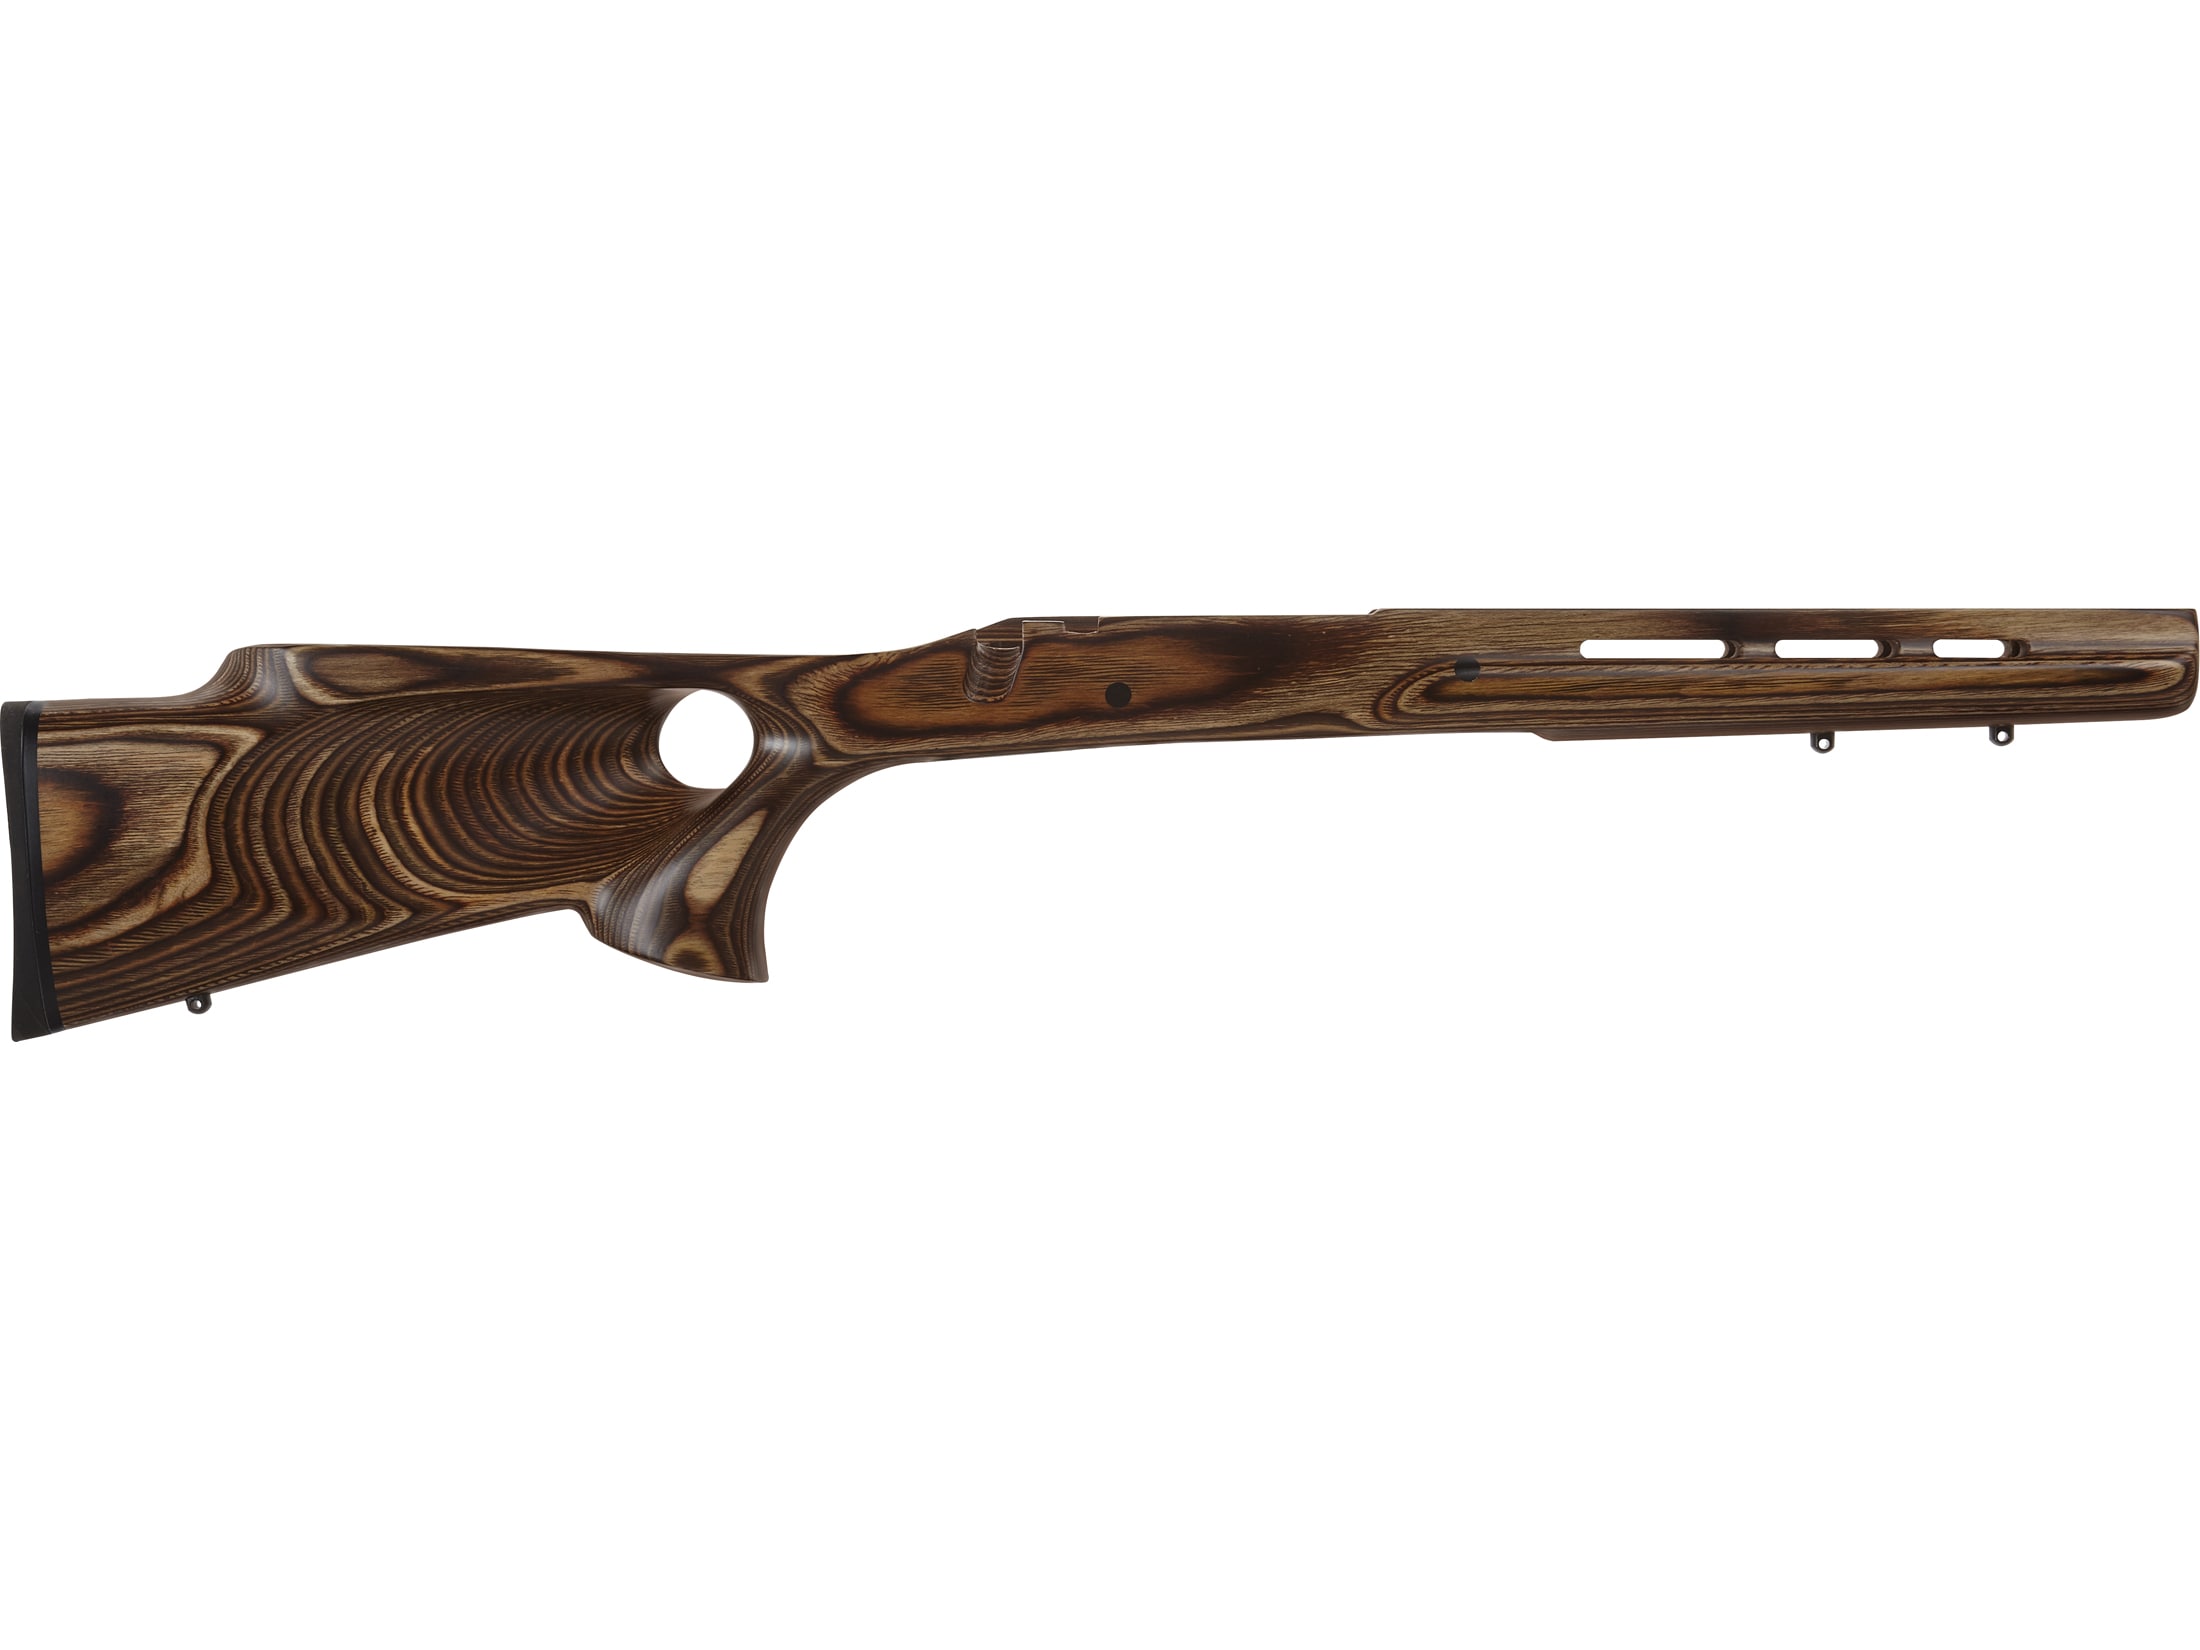 Weatherby thumb hole stock